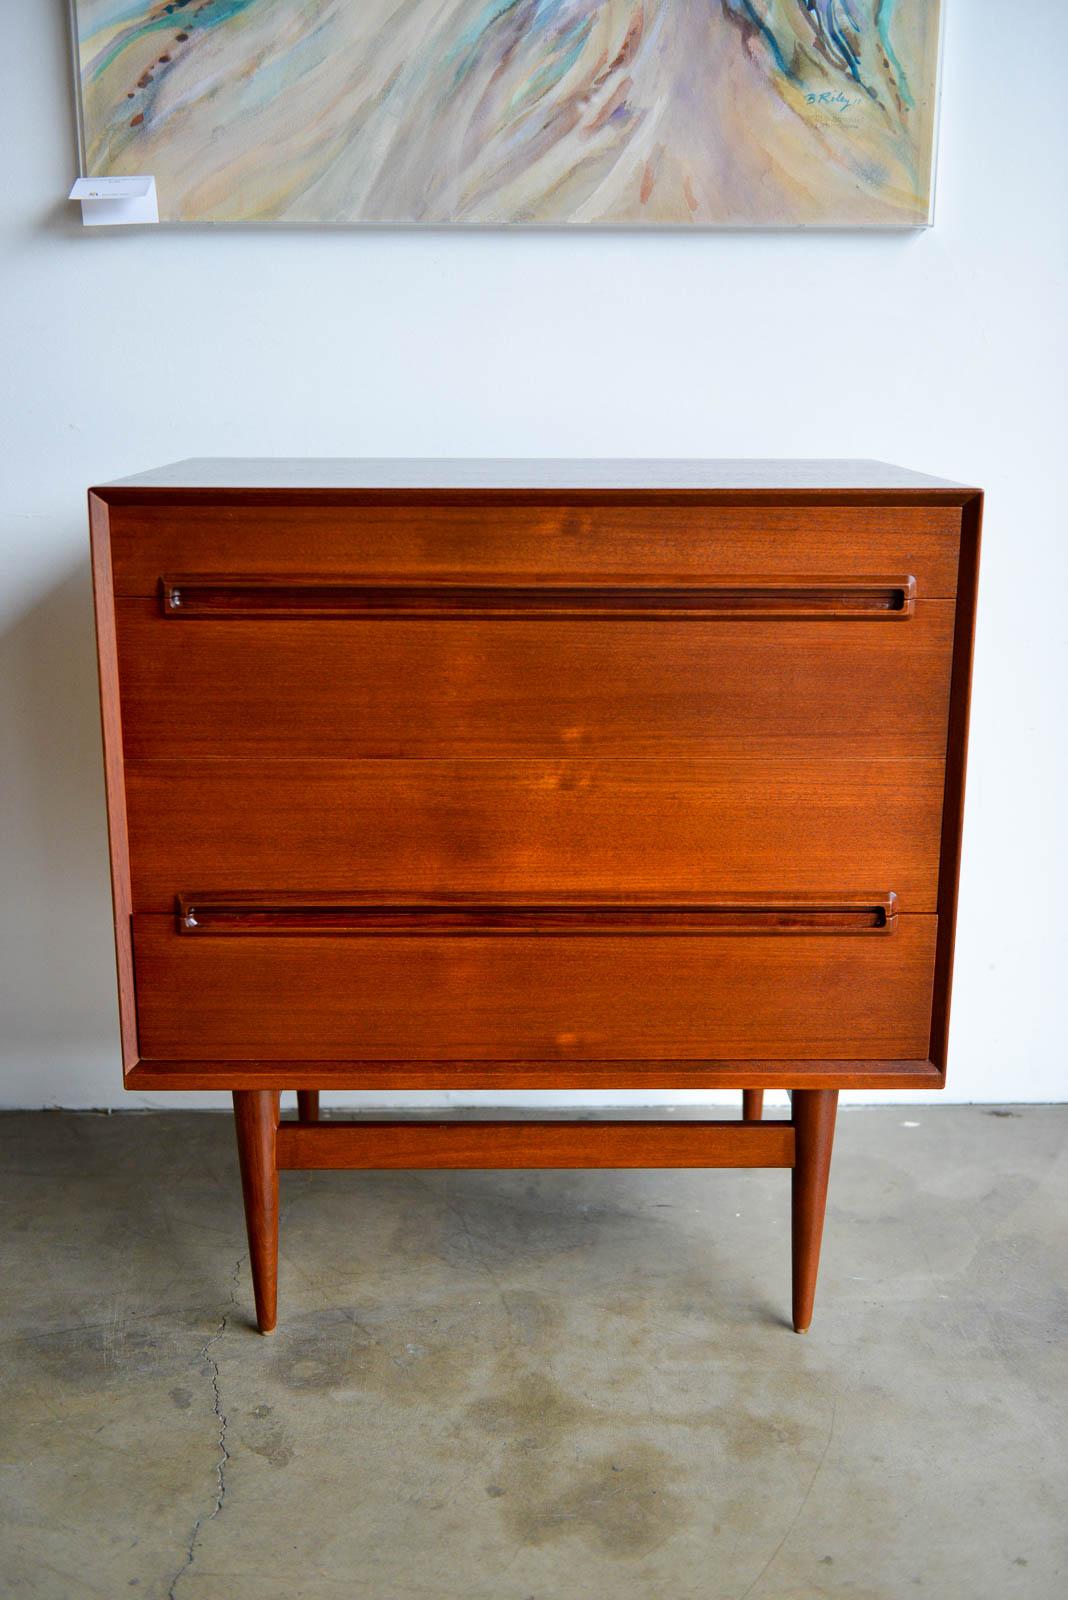 Teak 4-drawer cabinet by Erik Worts, Denmark 1959. Purchased by original owner from Den Permanente, Copenhagen in 1959. Provenance available. Professionally restored in showroom condition this rare piece shows off the delicate base and legs that